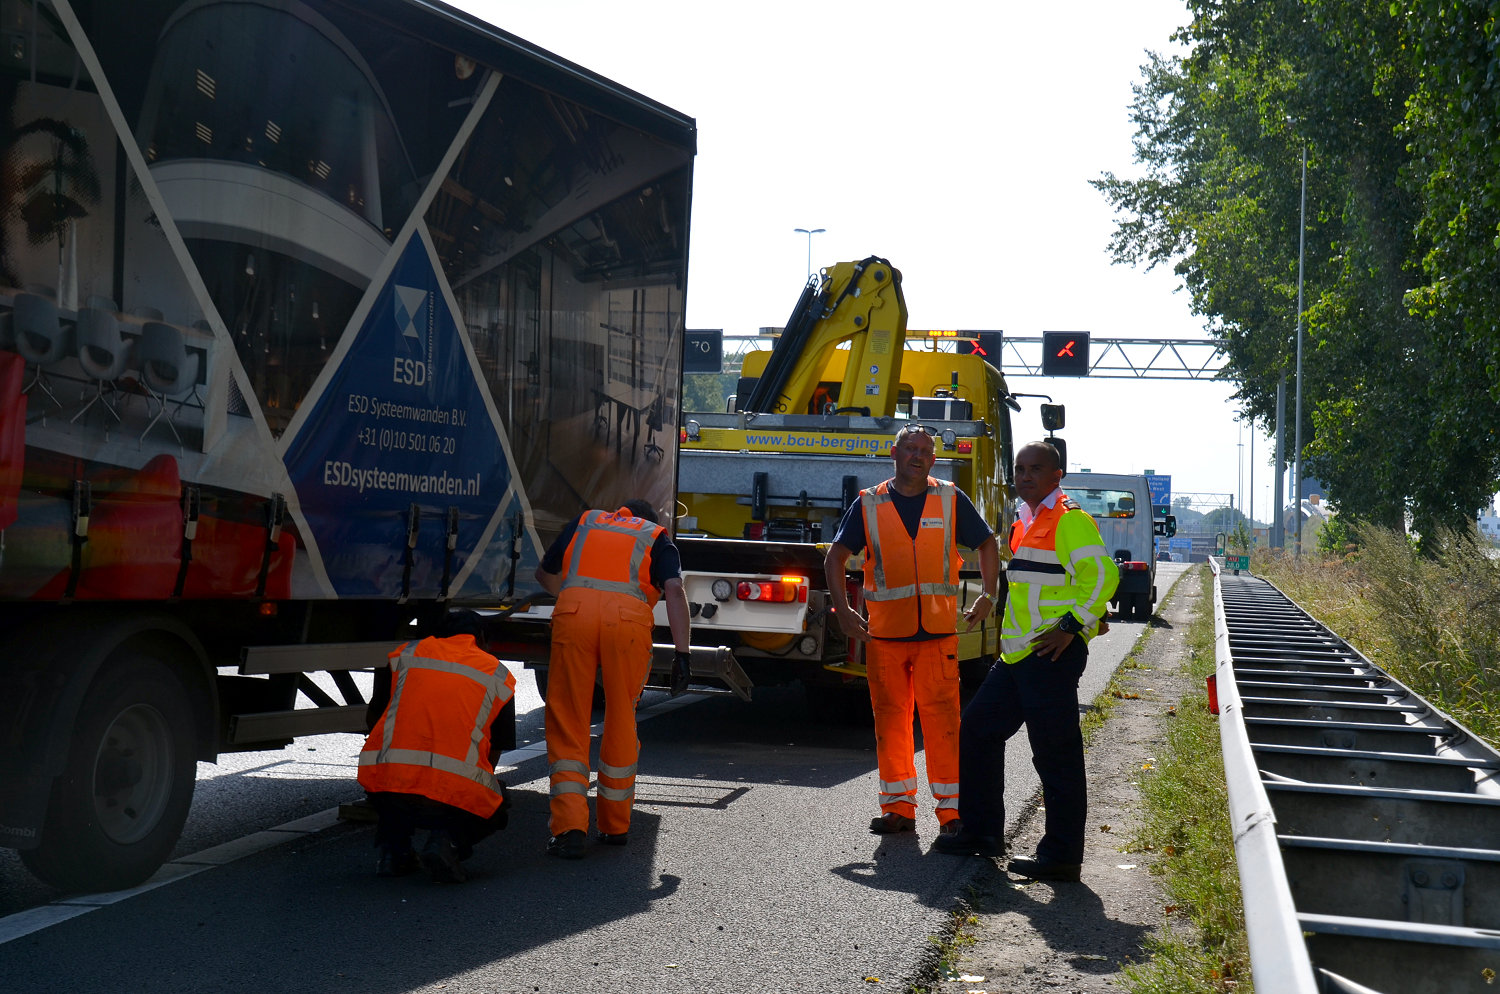 Accident on the 12 Left 28.0 on 18 August 2016 (photograph: Lars van der Toorn, 112HM)